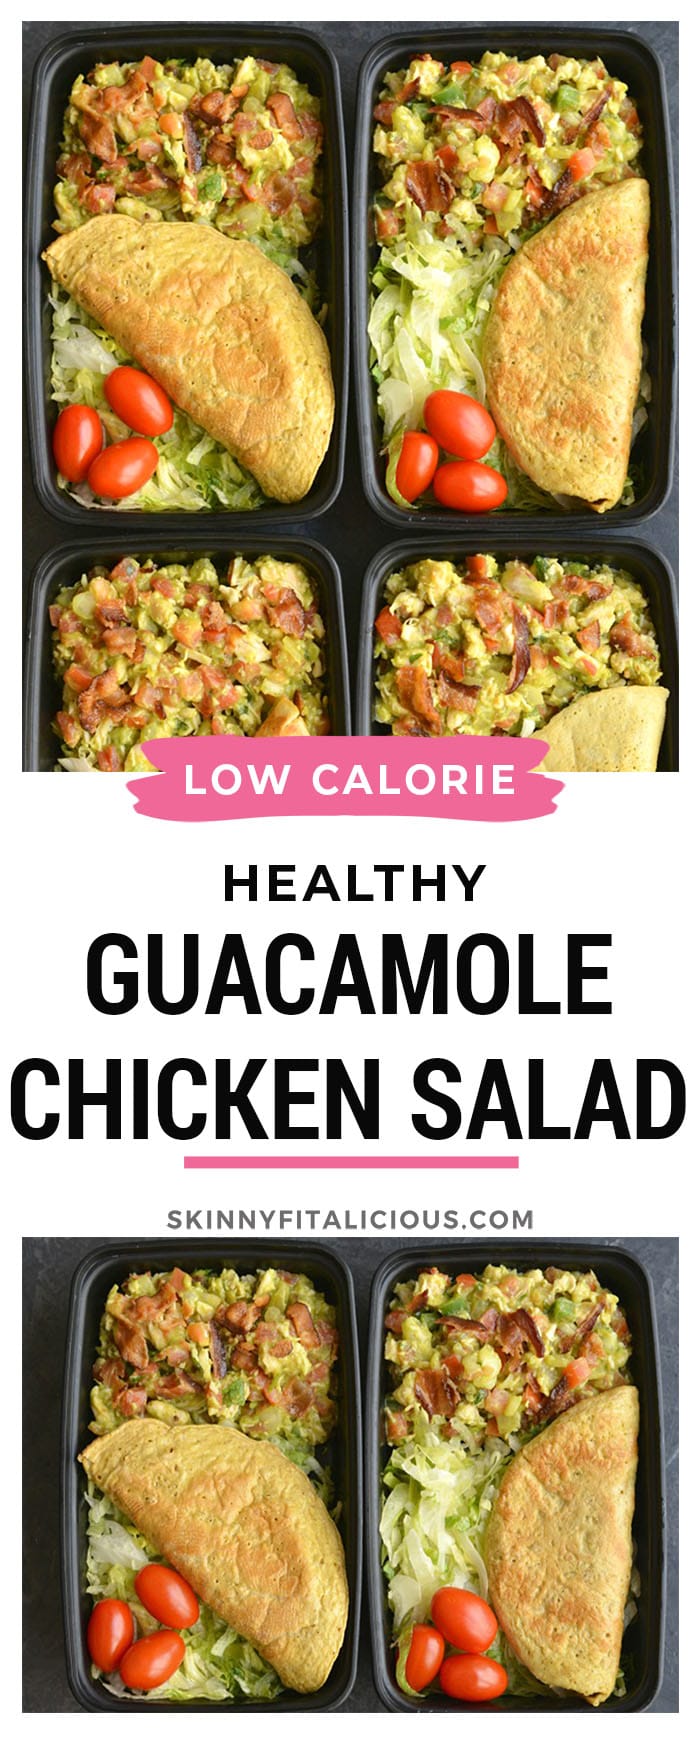 Meal Prep Bacon Guacamole Chicken Salad! Made with chicken, guacamole and bacon, this is low carb salad is perfect for an easy lunch. Pair with lettuce and your favorite low carb tortilla for a quick and easy meal prep. Lunch doesn't get any easier or more delicious than this!